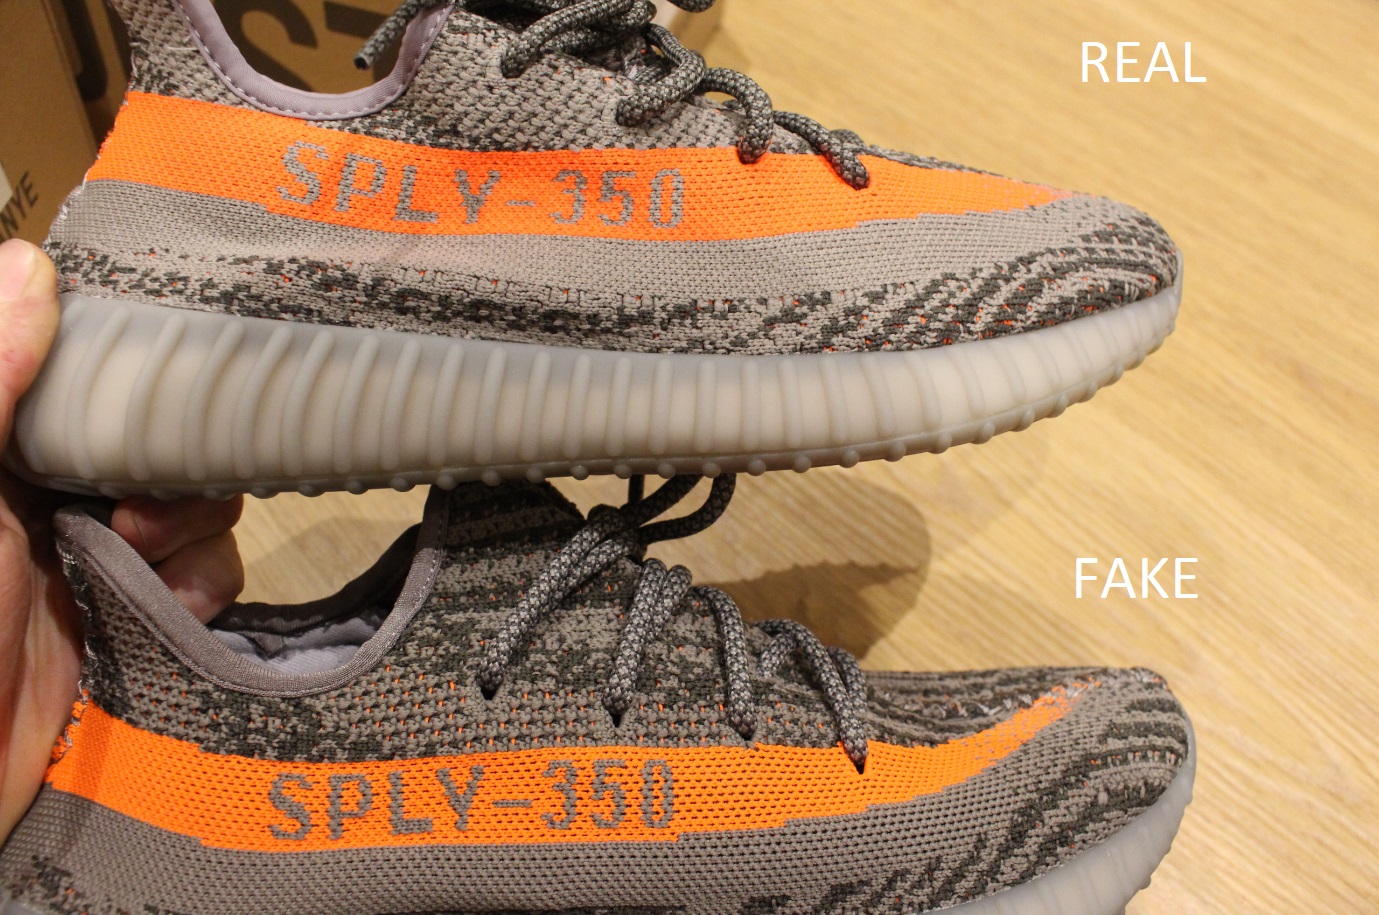 yeezy boost 350 how to tell if fake